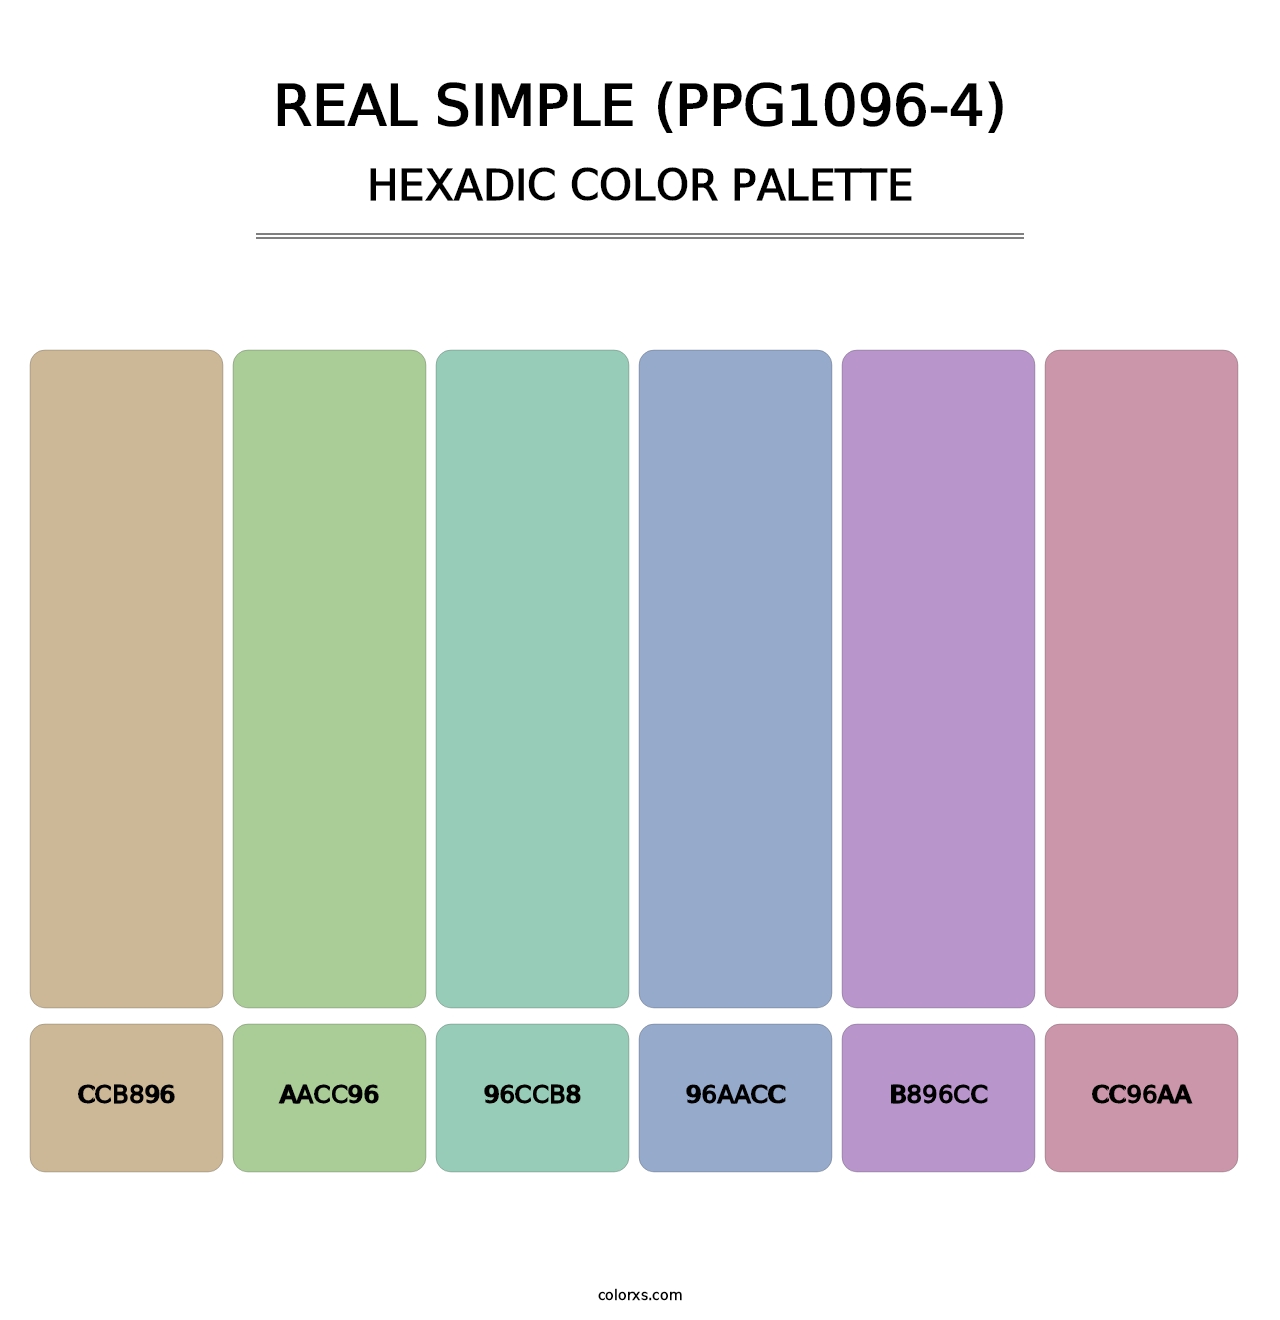 Real Simple (PPG1096-4) - Hexadic Color Palette